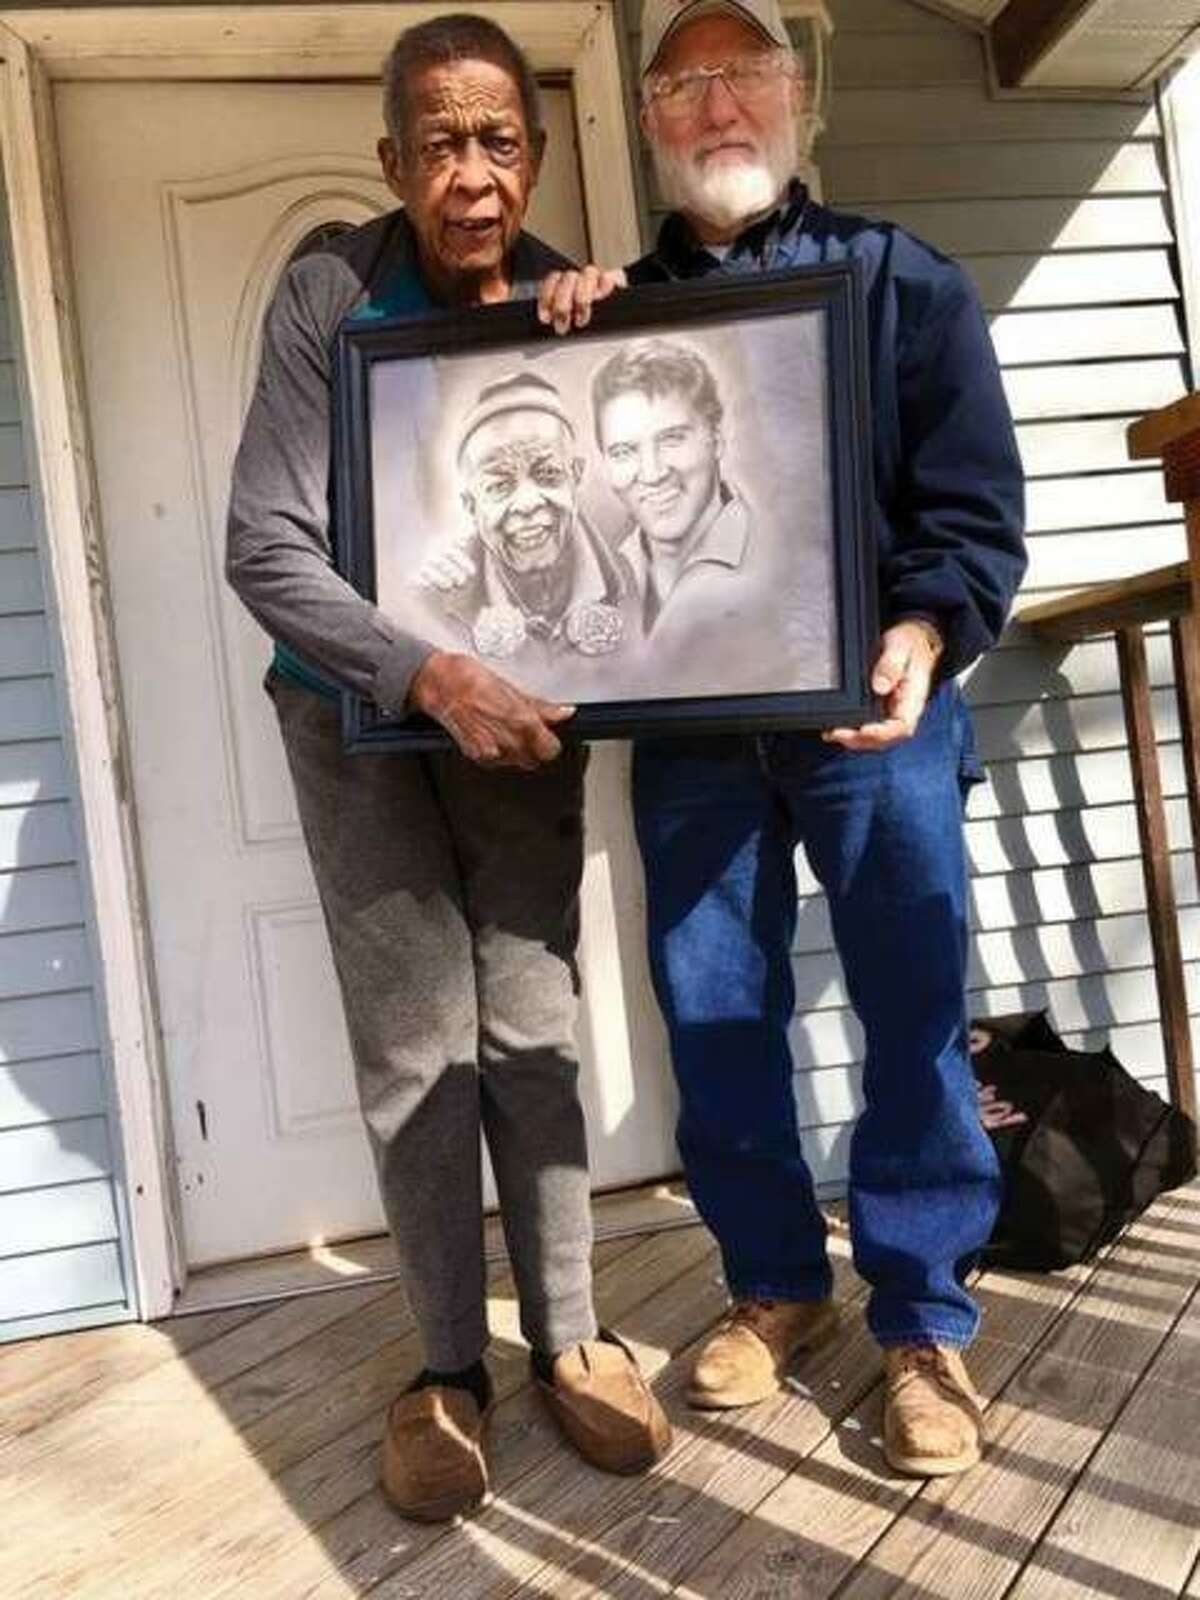 Marvin “Preach” Webb, left, holds the portrait he was presented by Edwardsville artist Stan Kincaid on his 82nd birthday in January 2018.